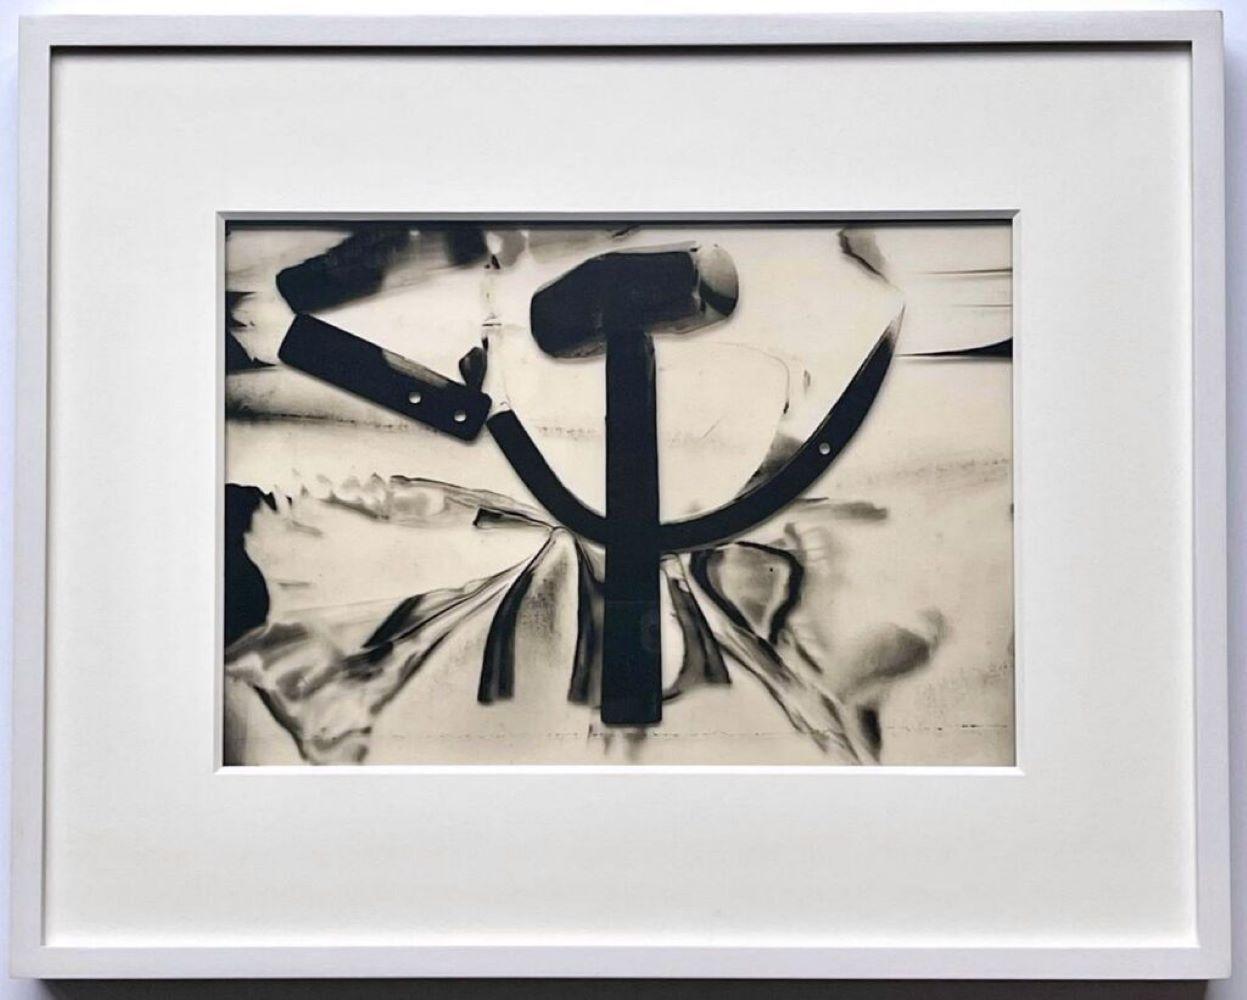 Hammer & Sickle, acetate of iconic image, given by Warhol to Chromacomp Inc. 